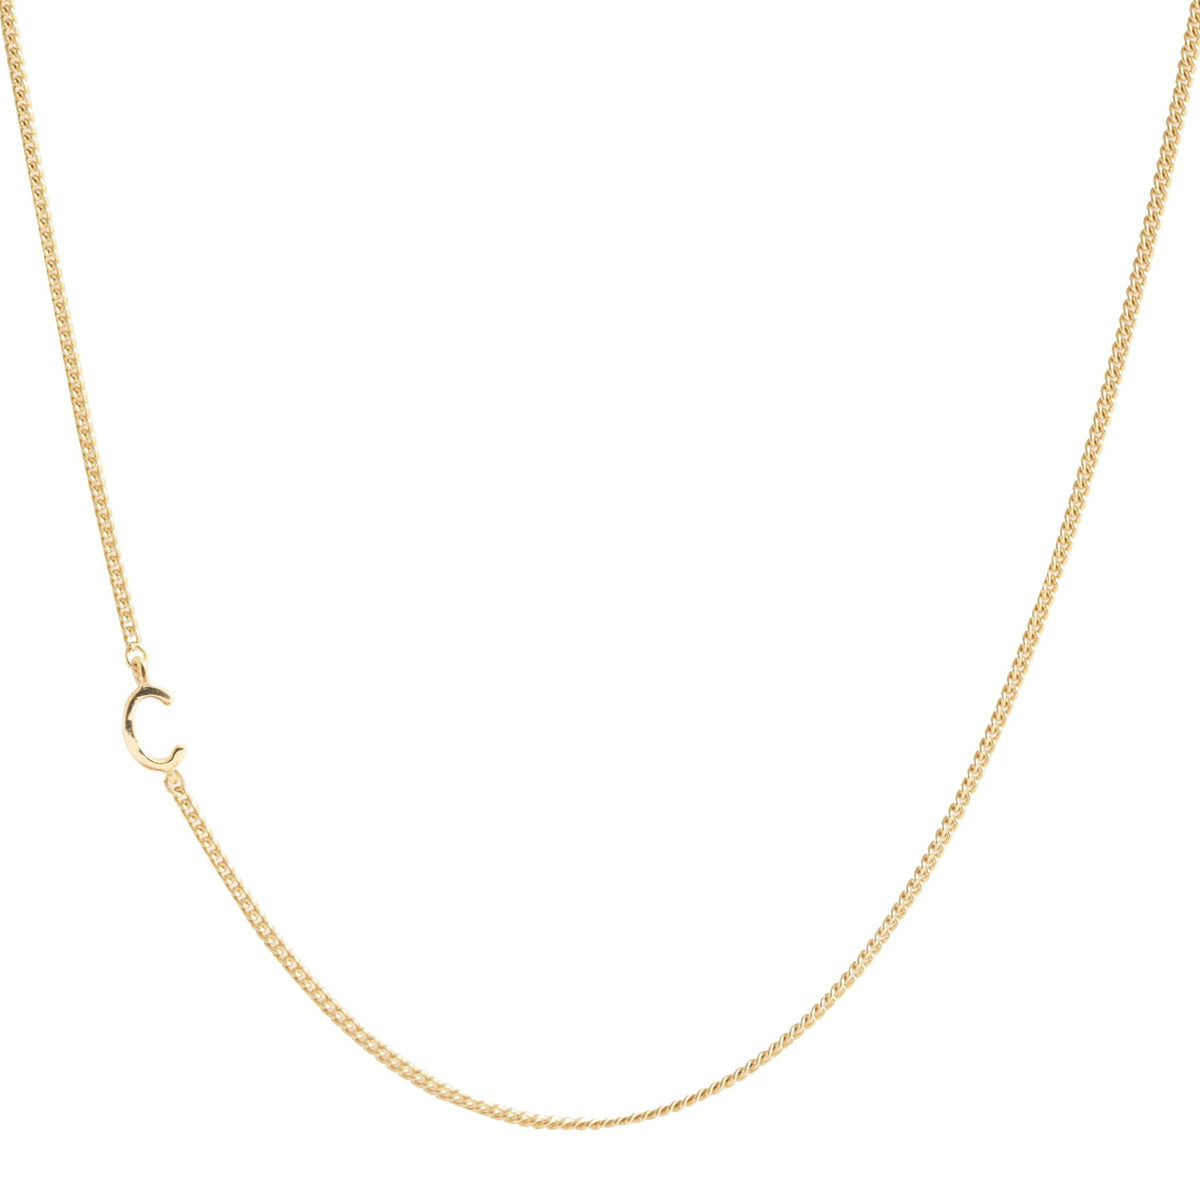 NOTABLE OFFSET INITIAL NECKLACE - C - GOLD - SO PRETTY CARA COTTER